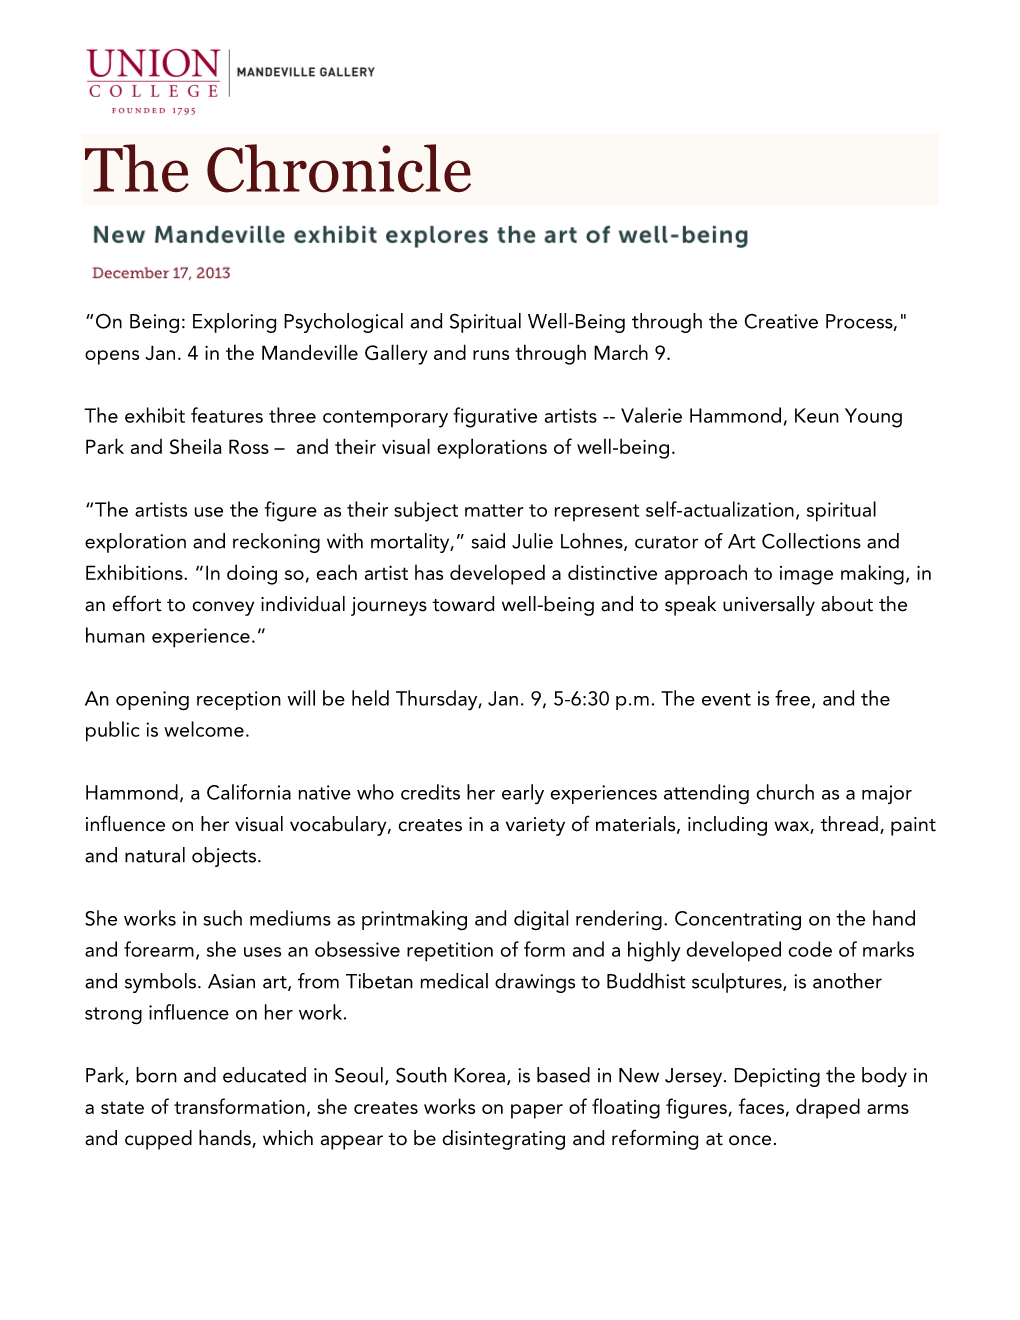 The Union College Chronicle